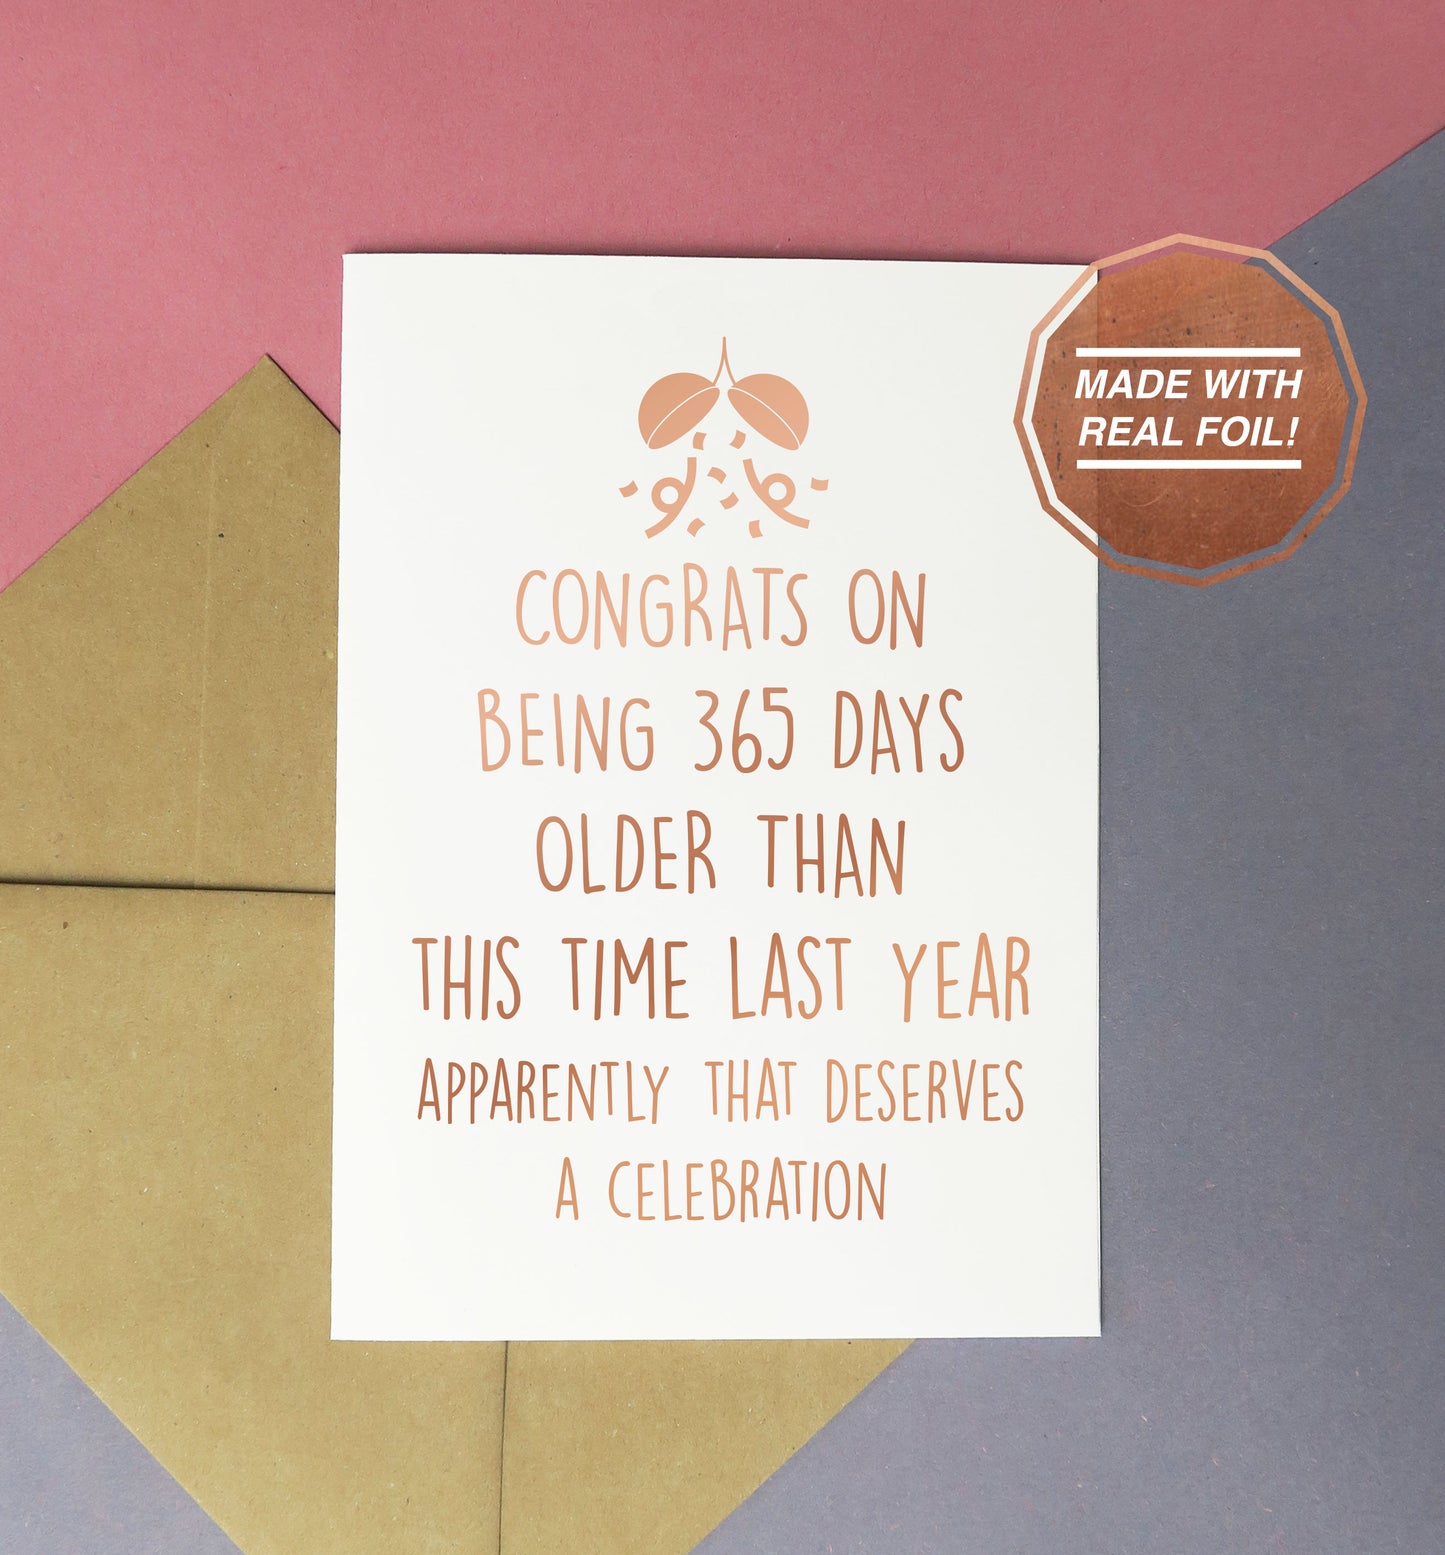 Congrats on being 365 days older than you were this time last year apparently that deserves a celebration | Foiled print / greeting card